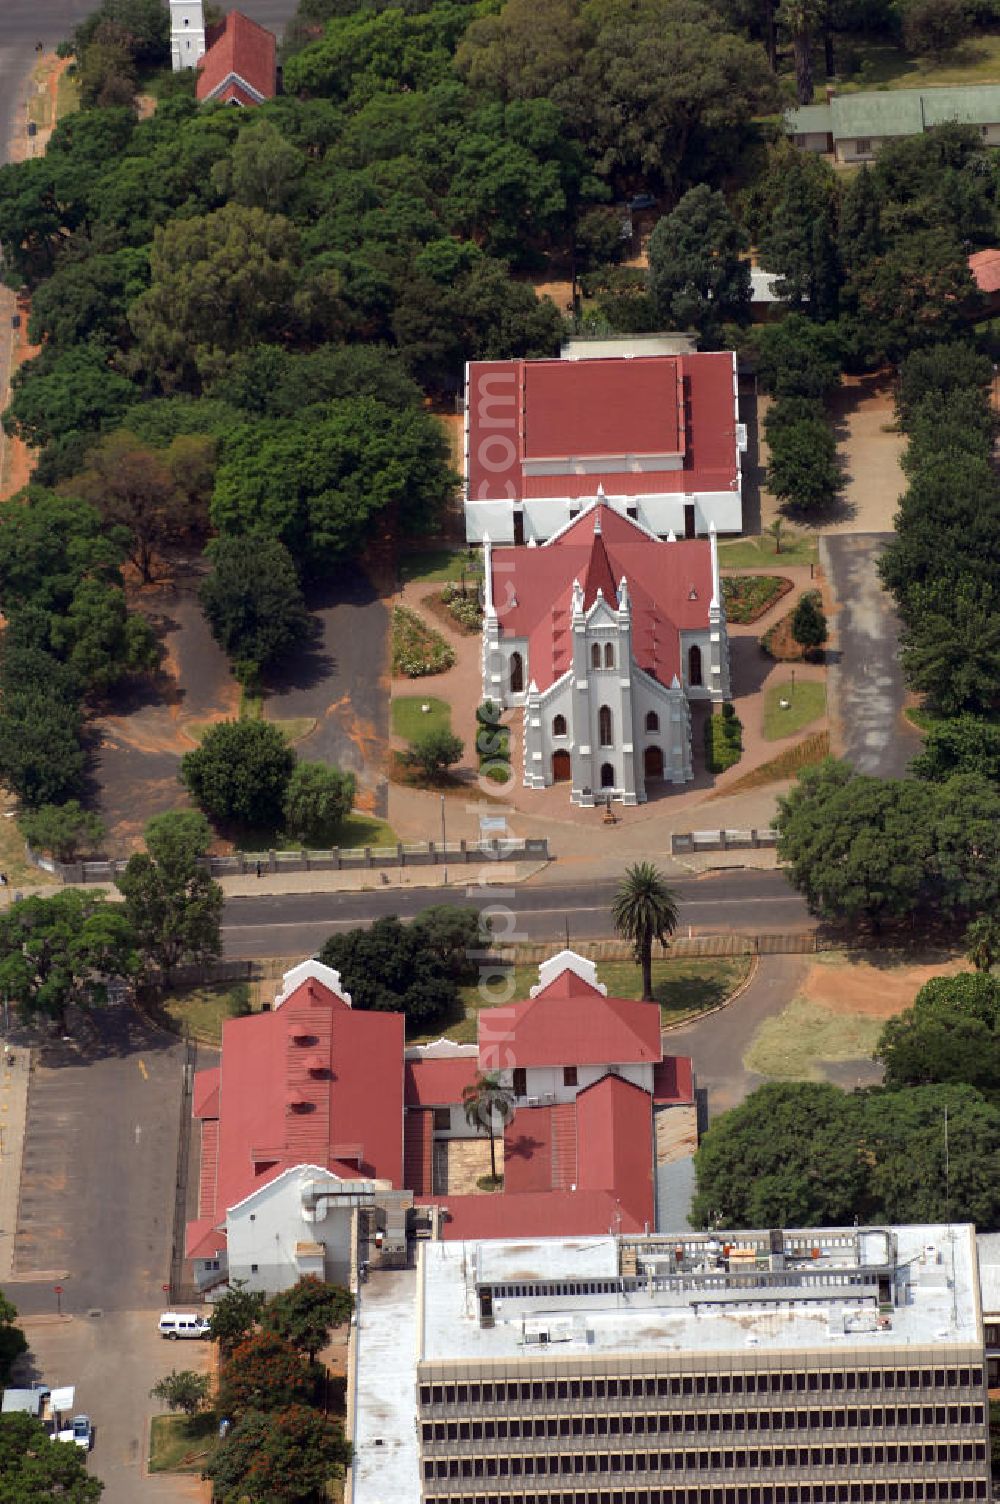 RUSTENBURG from above - View of the surroundings of the Moedergemeente church in Rustenburg, South Africa